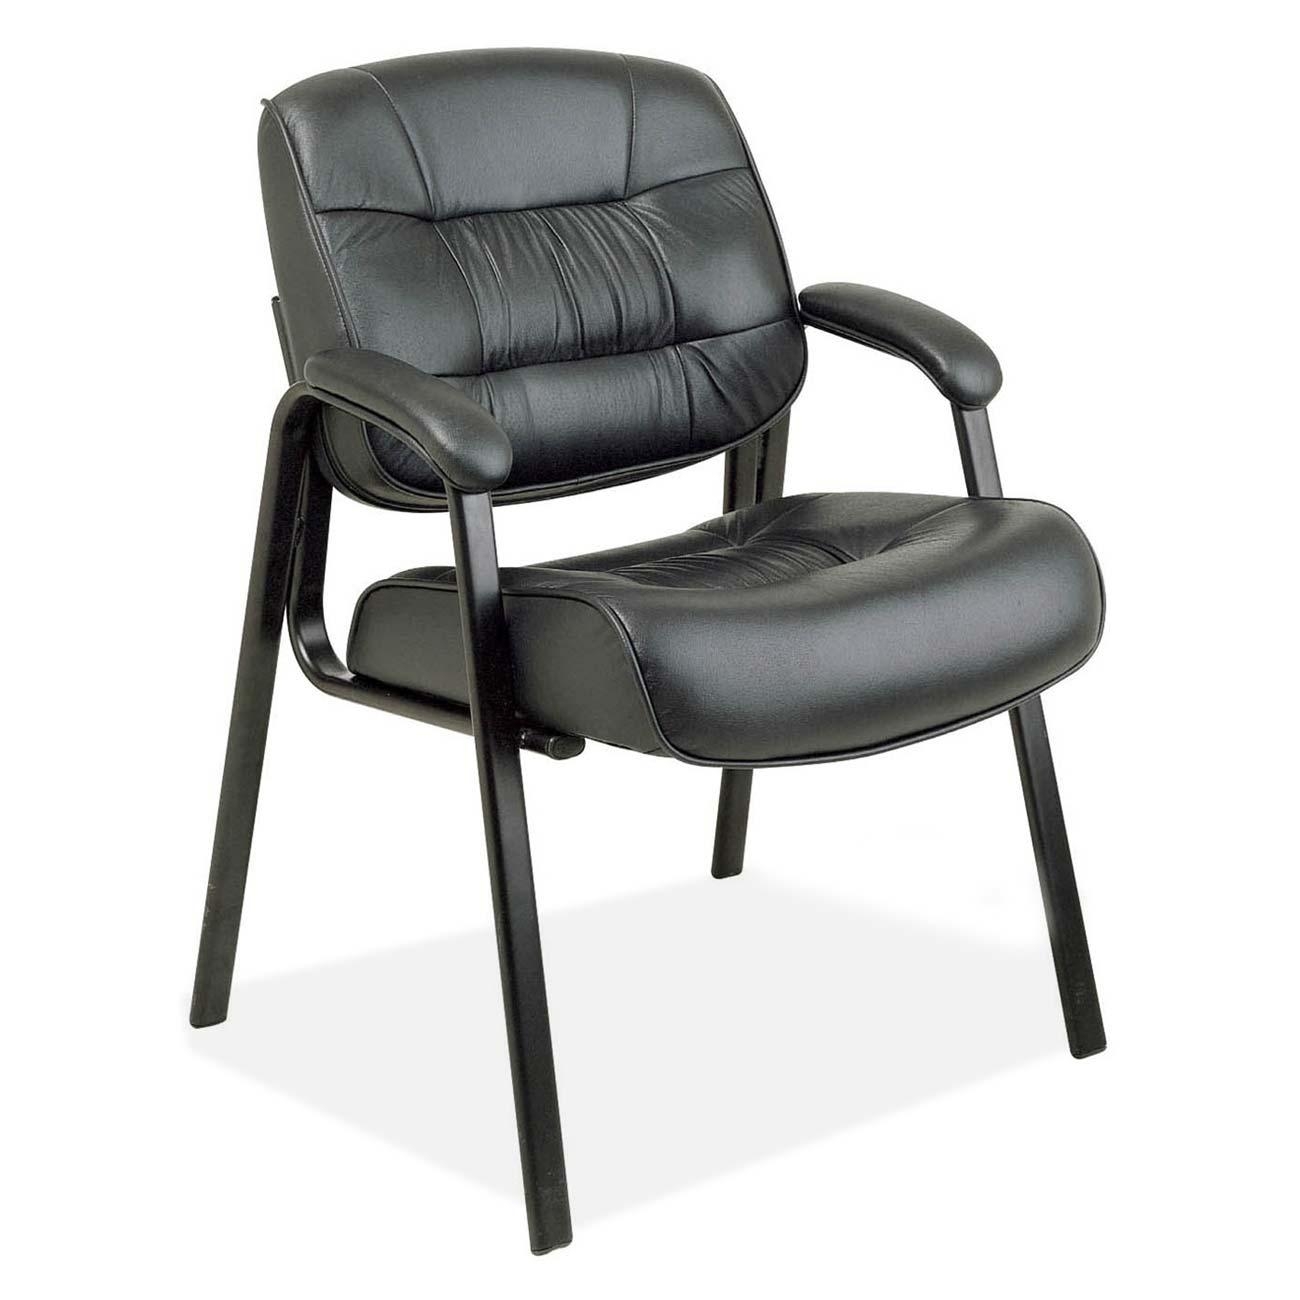 Rosewill High Back Leather Executive Chair   Black (RFFC 11001)